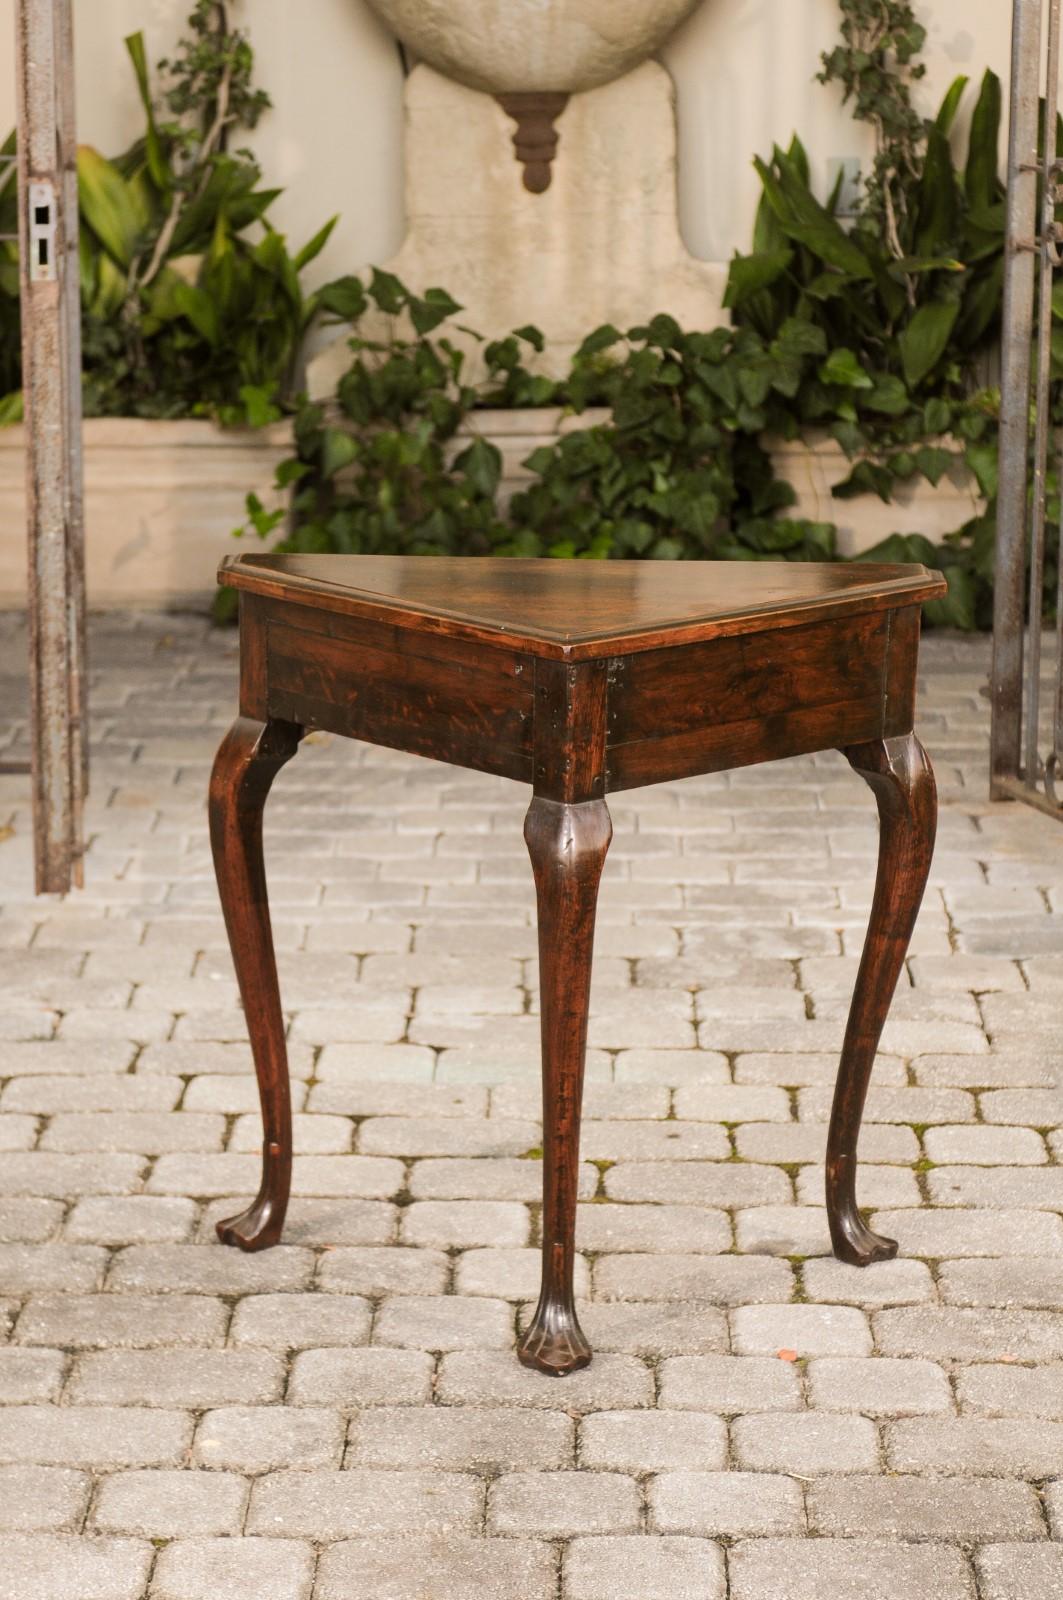 An English mahogany console table from the mid-19th century, with triangular top, cabriole legs and trifid feet. Born in England during the second quarter of the 19th century, this charming mahogany console table features a triangular top with